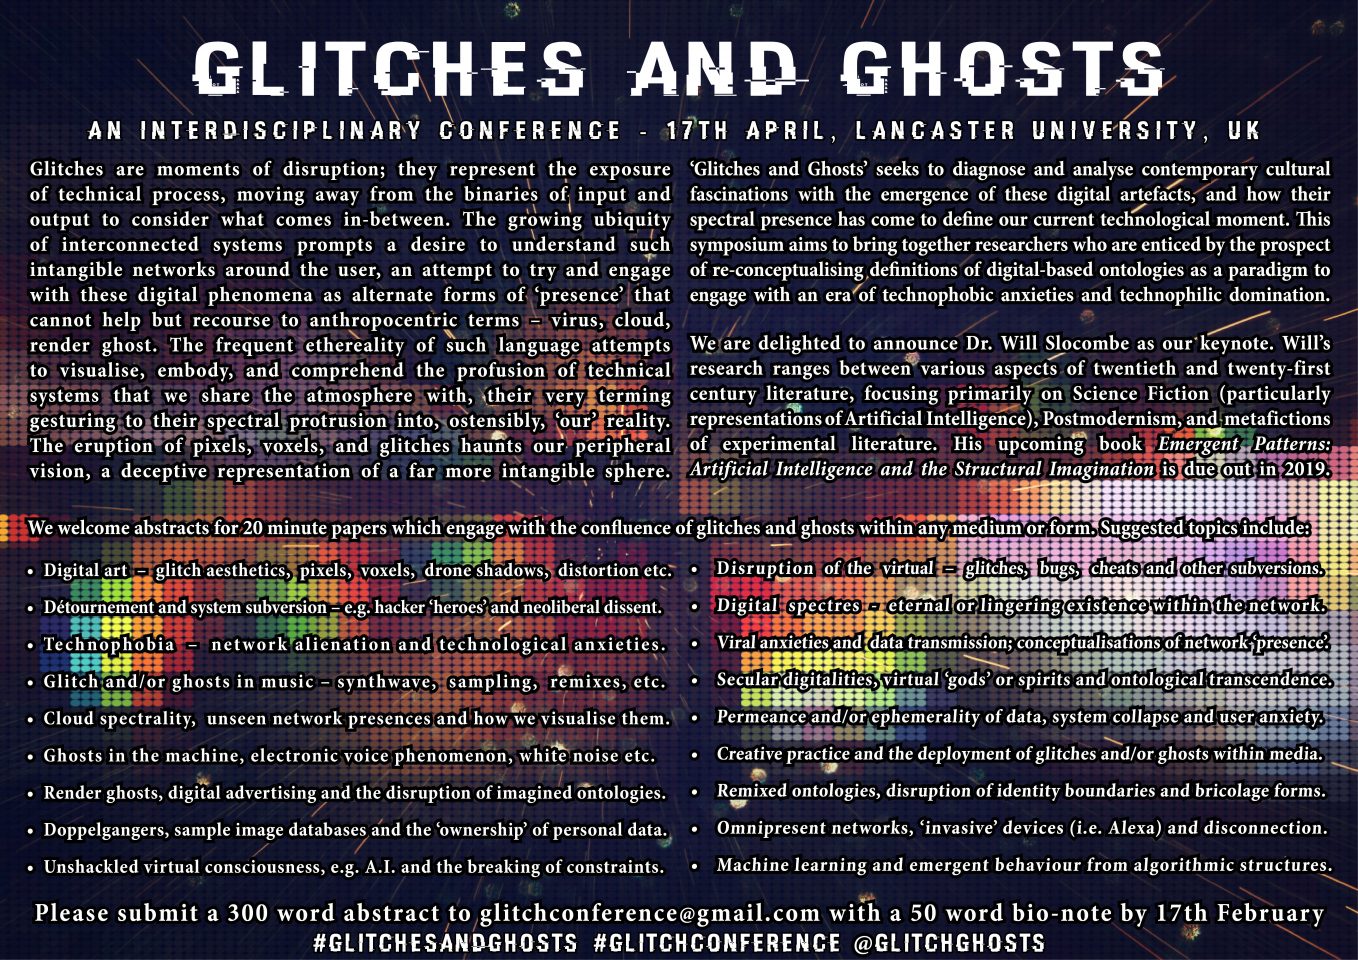 Glitches-and-Ghosts-CFP-1-1358x960